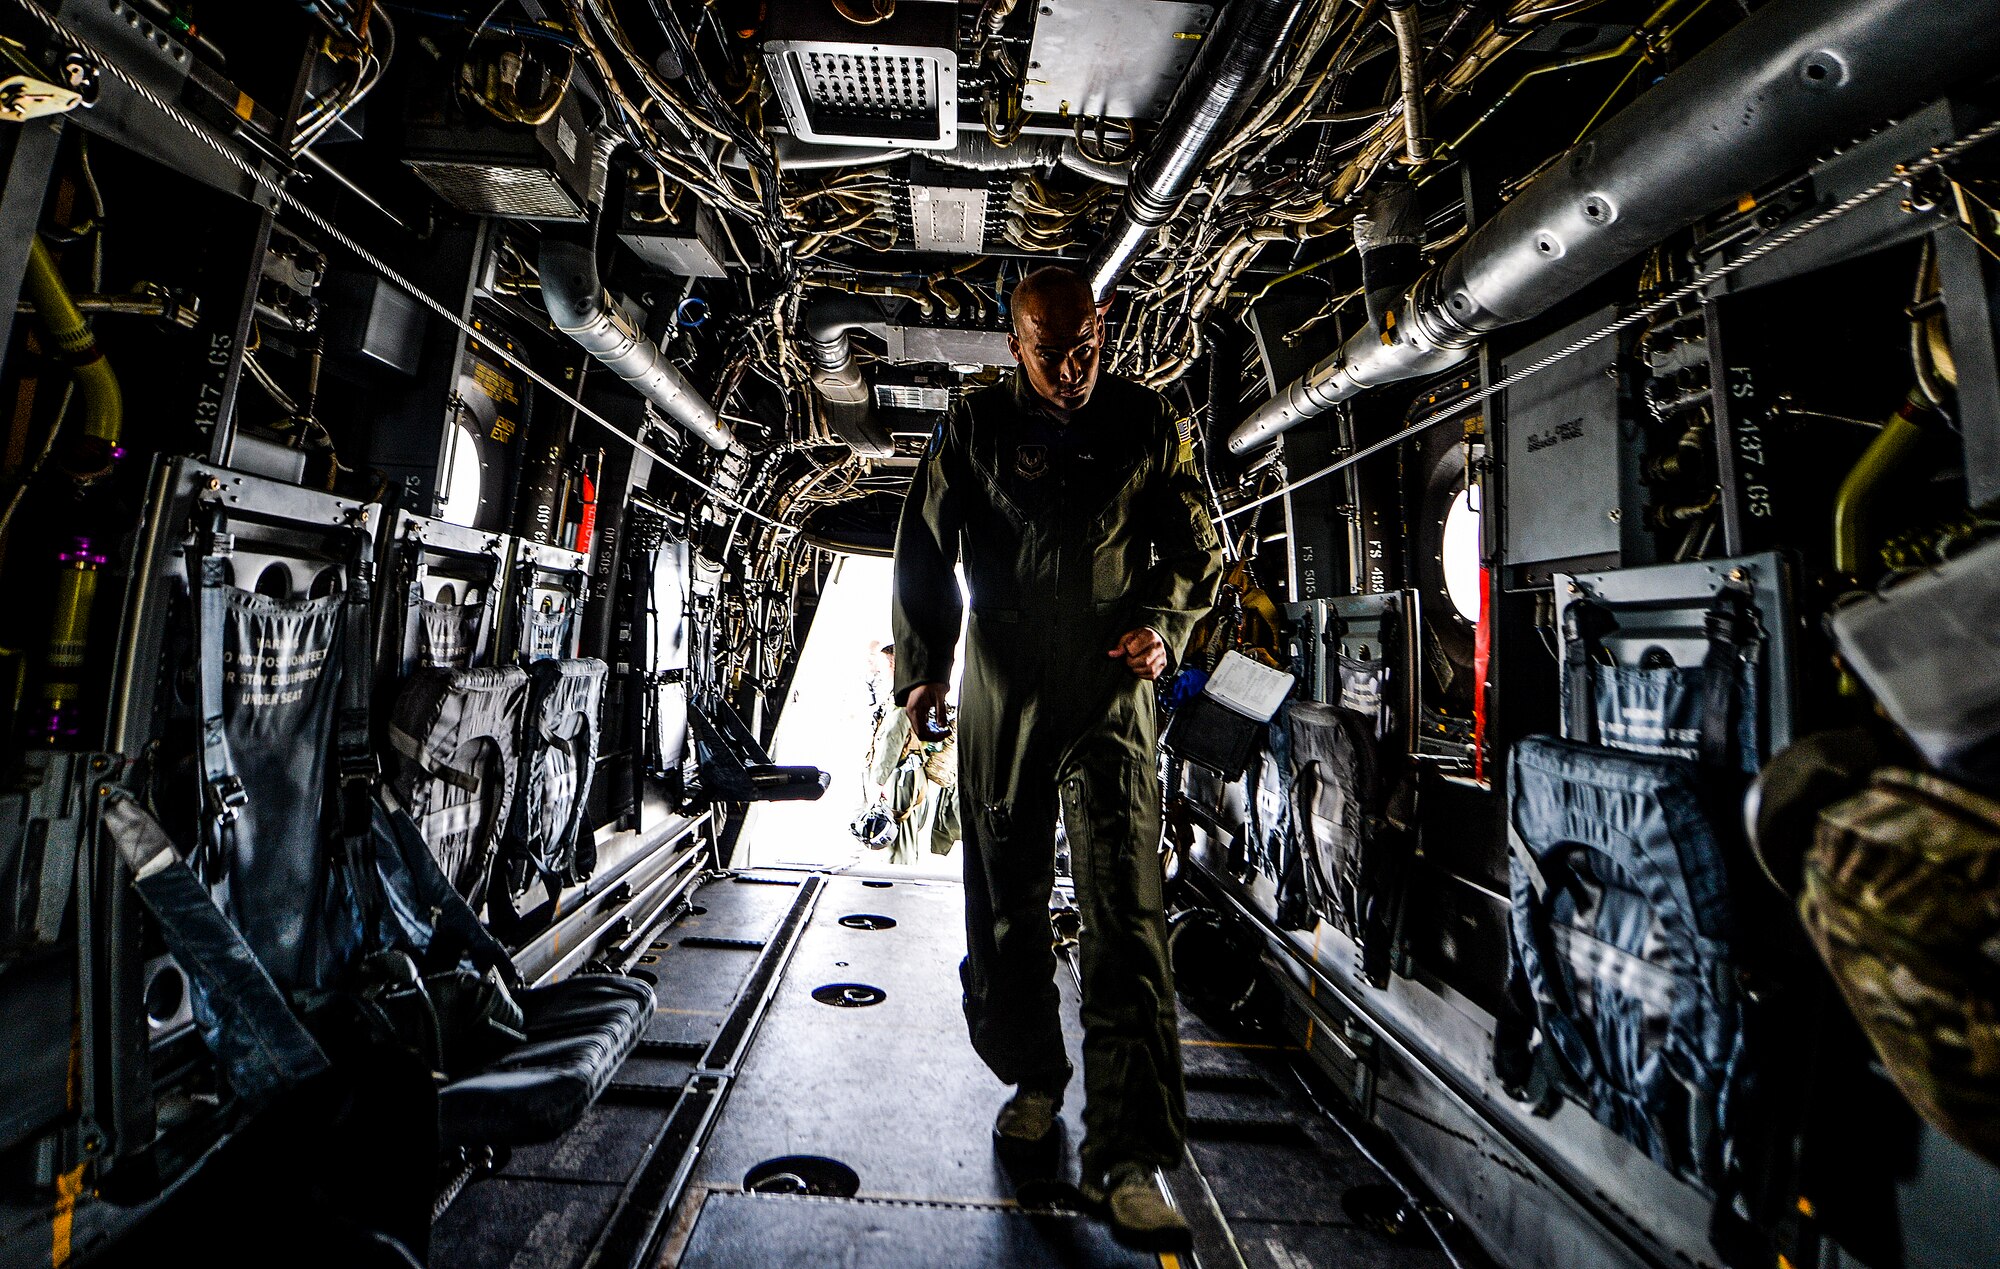 Tech. Sgt. Edilberto Malave, 8th Special Operations Squadron flight engineer, conducts a preflight inspection of a CV-22 Osprey on Hurlburt Field, Fla., March 6, 2014. The 8th SOS is one of the oldest units in the United States Air Force, it was organized as the 8th Aero Squadron on 21 June, 1917 at Kelly Field, Texas. (U.S. Air Force photo/Senior Airman Christopher Callaway) 